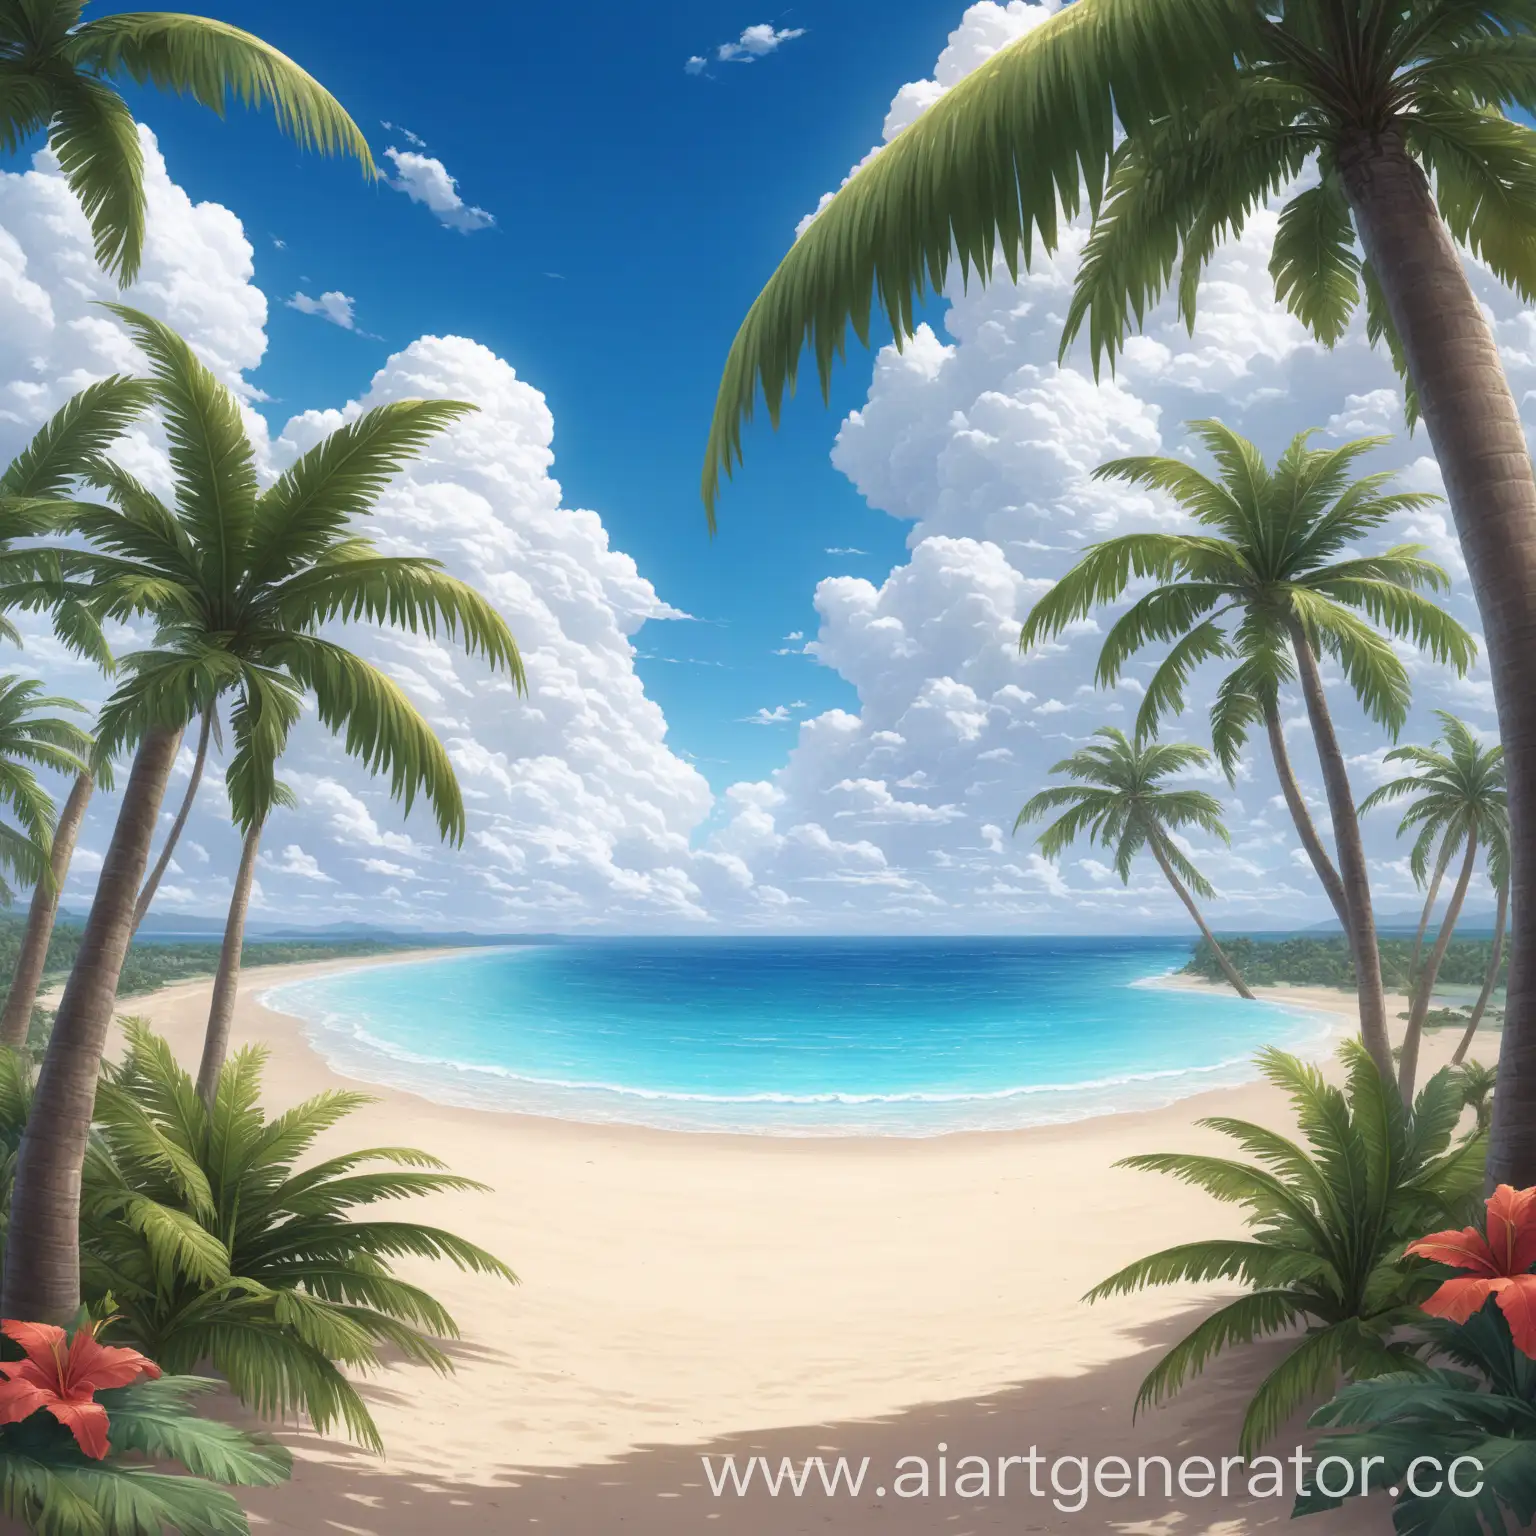 Tropical-Beach-Scene-with-Palm-Trees-and-Ocean-View